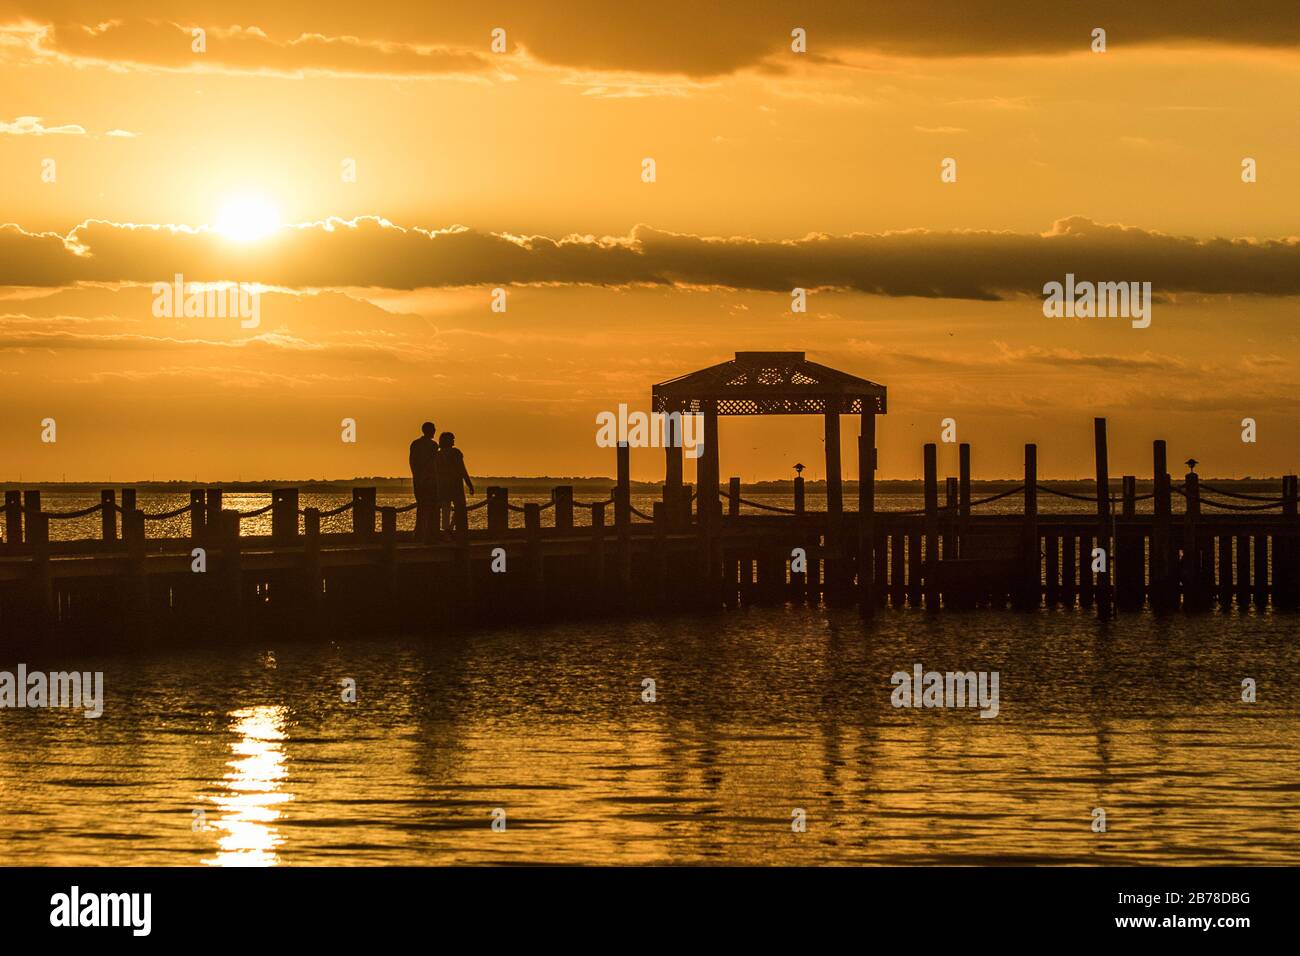 A couple watches a yellow sunset over Brnegat Bay from Long Beach Island at the Jersey shore Stock Photo